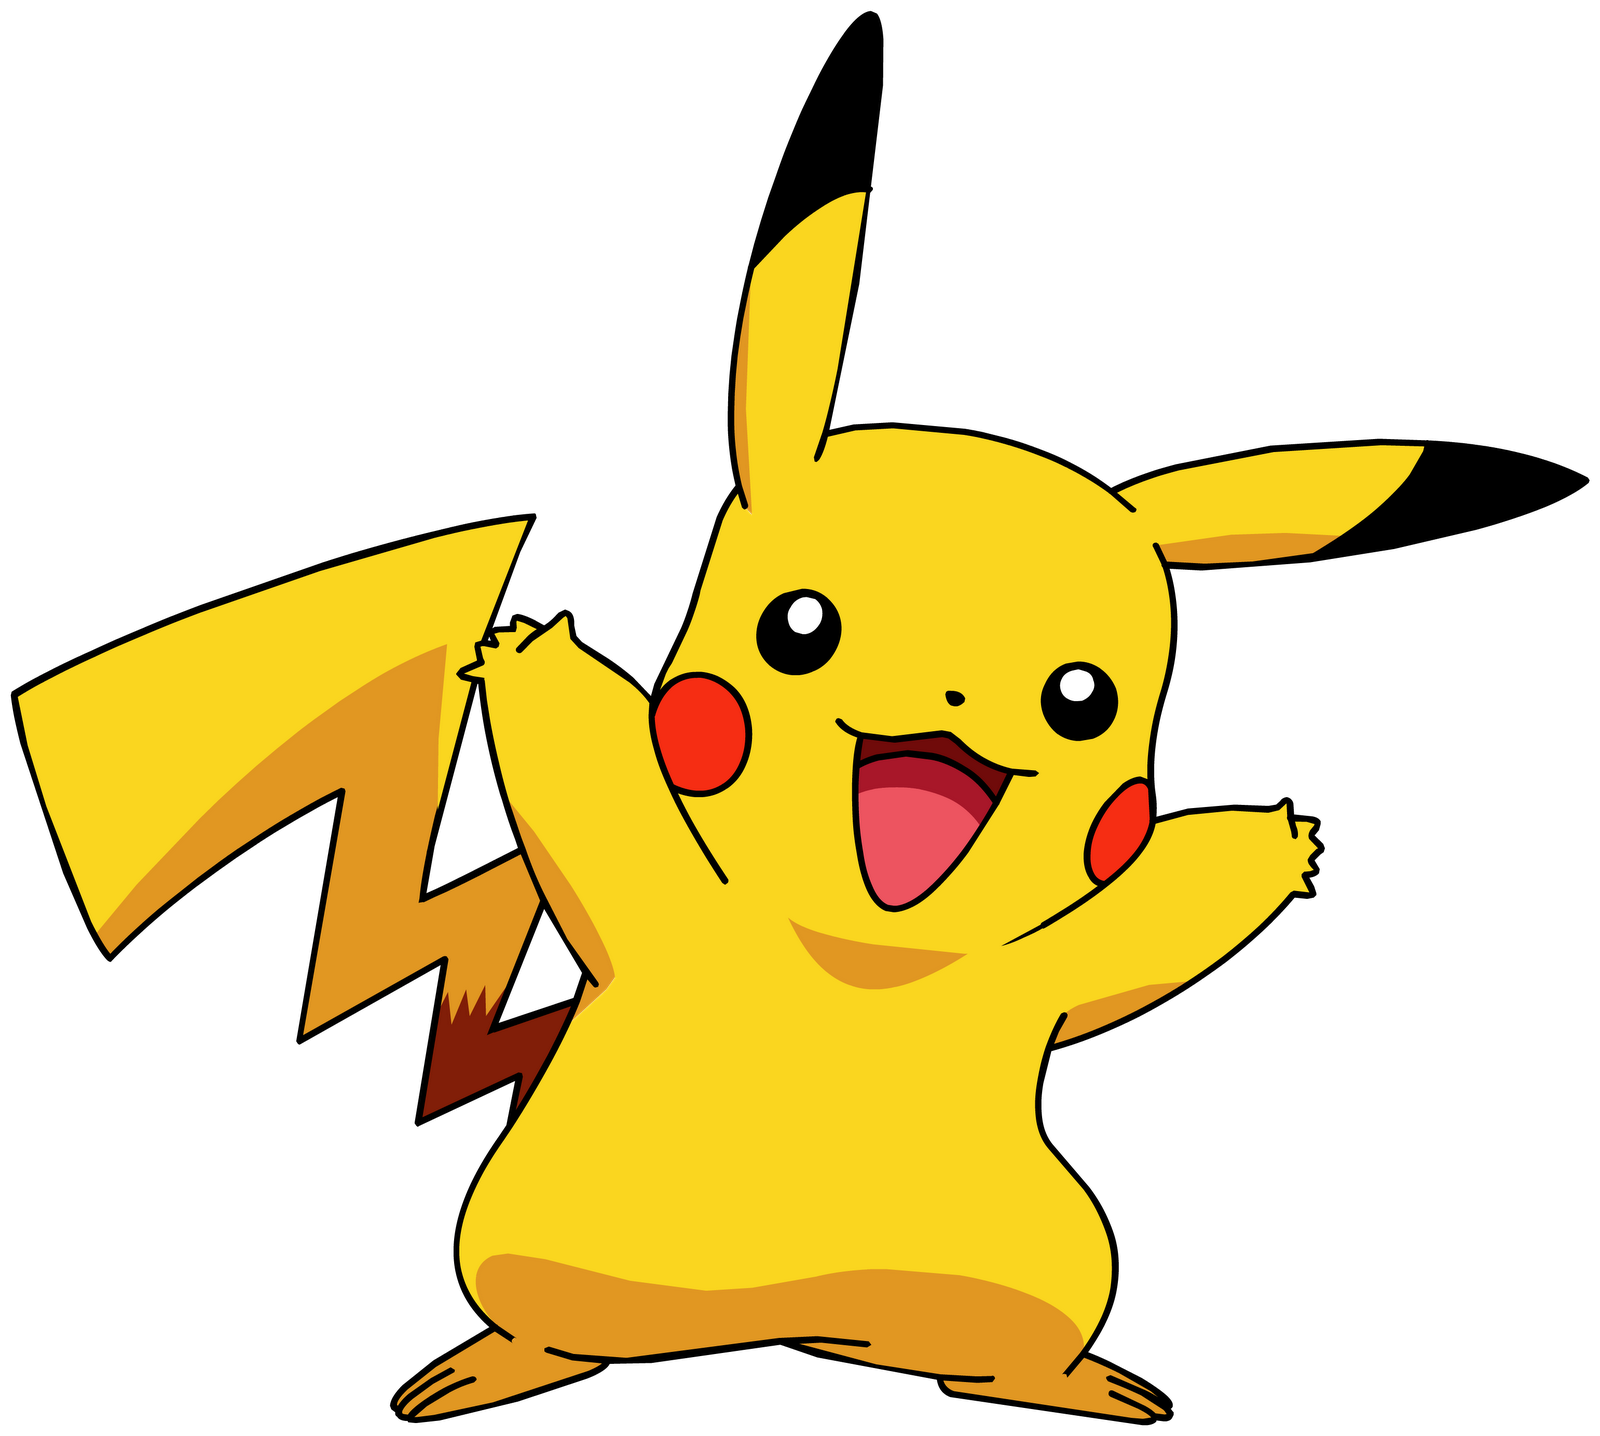 Pikachu, the electric mouse